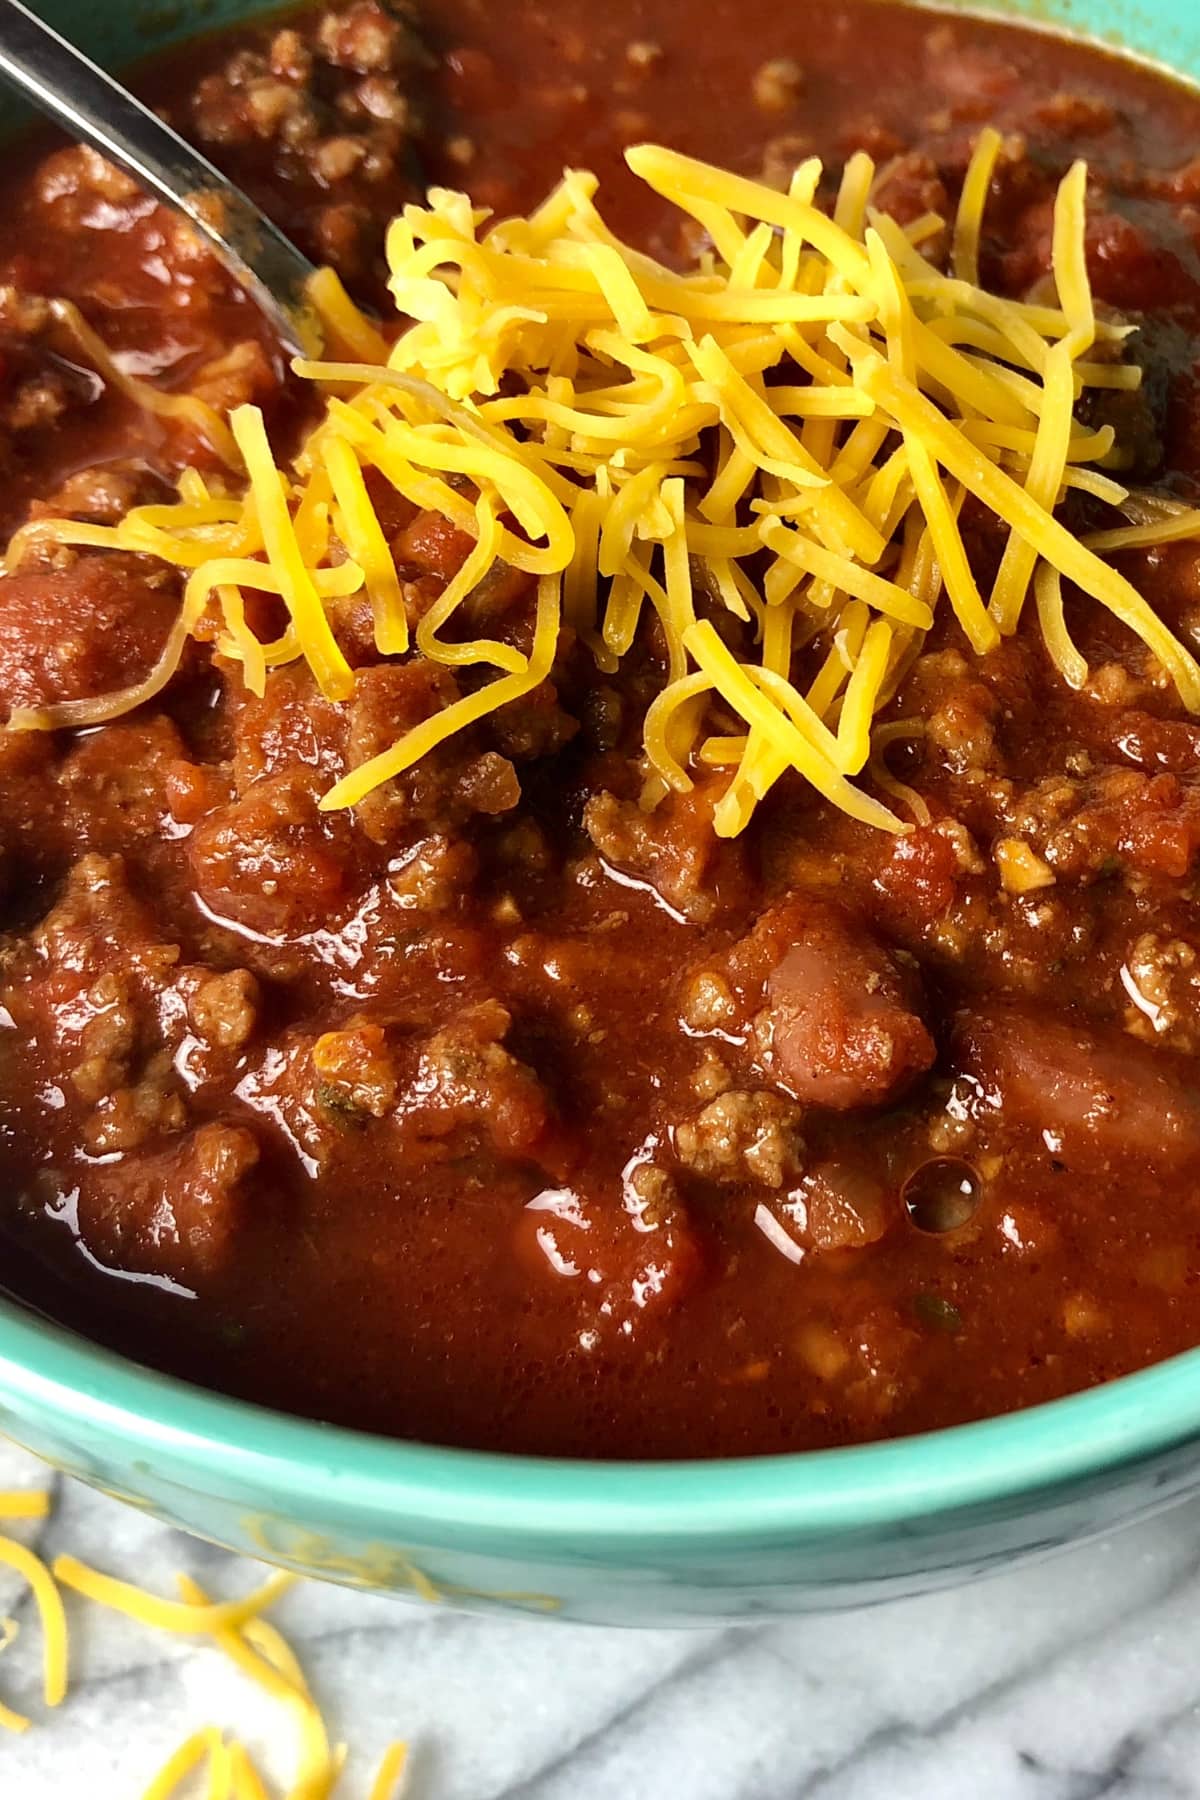 Homemade Chili with Ground Beef and Shredded Cheese in a Colorful Bowl